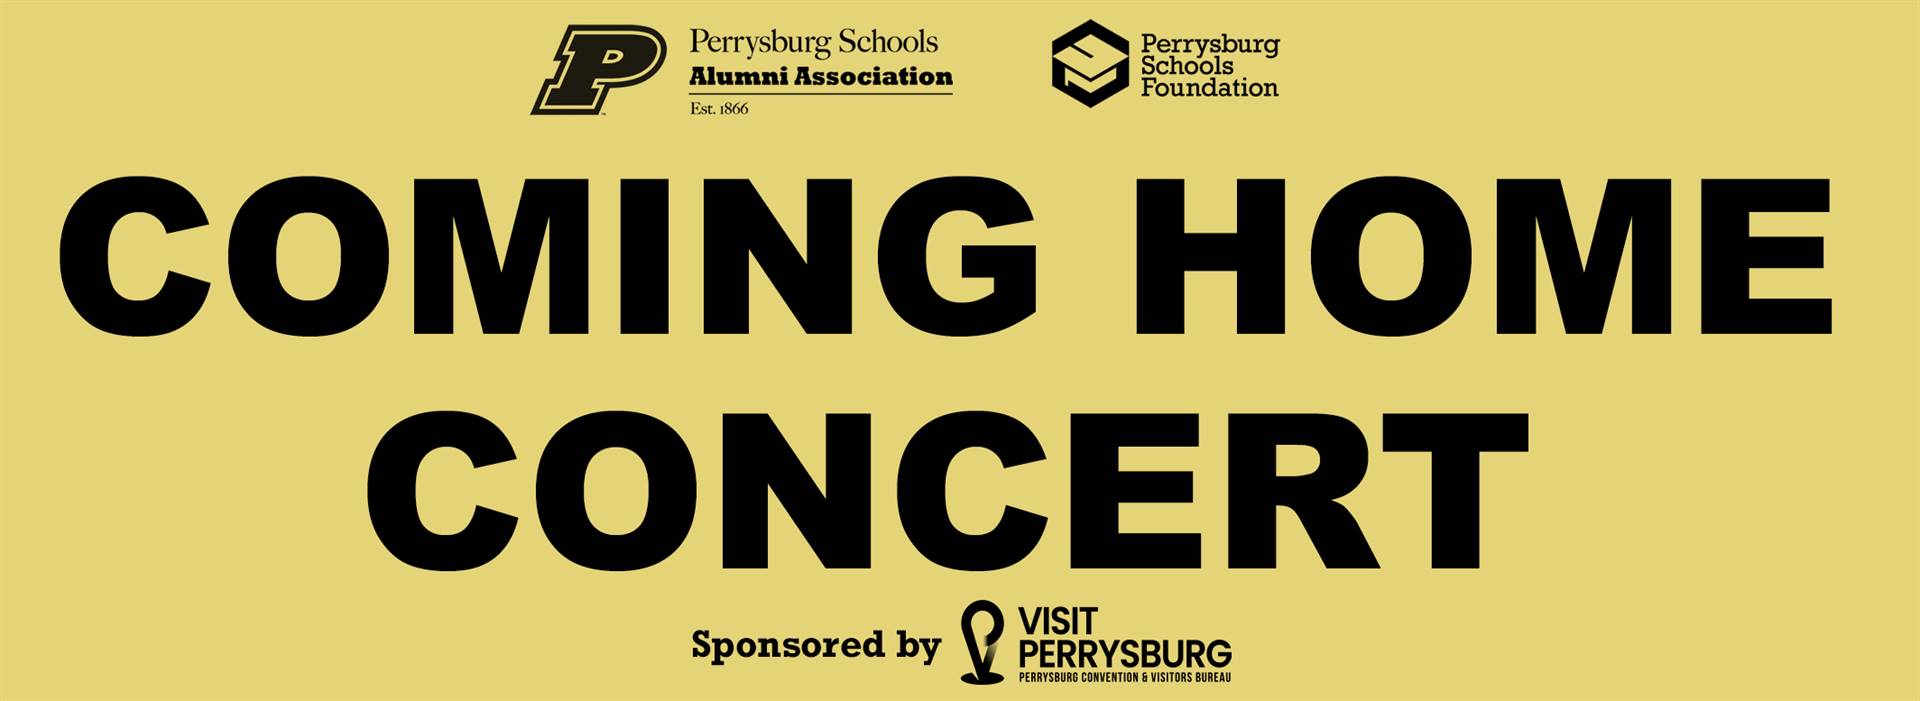 Coming Home Concert sponsored by Visit Perrysburg